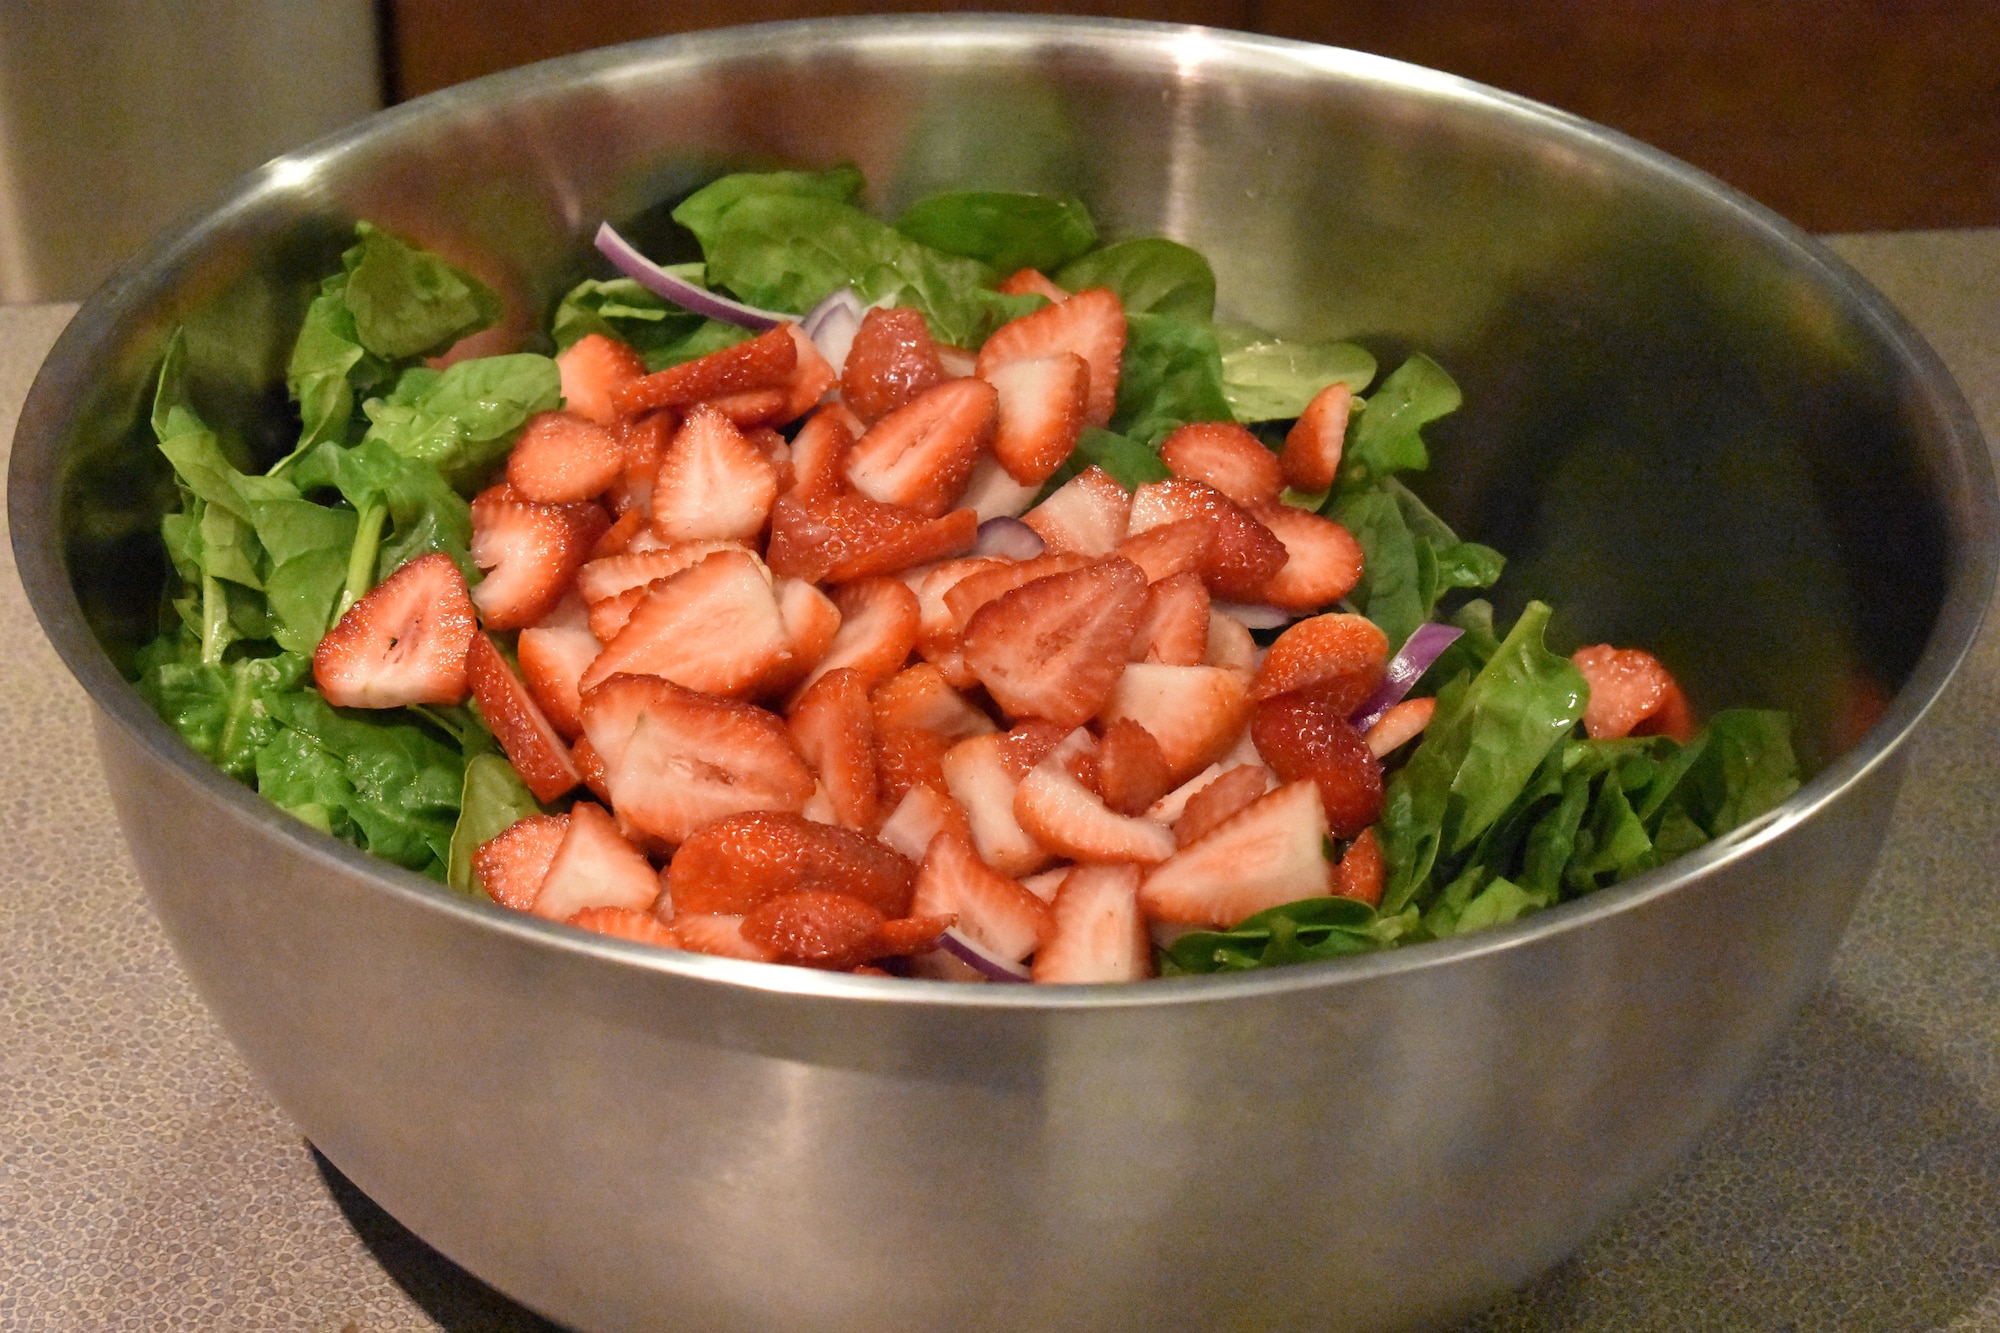 Strawberries rest atop a bed of salad greens Feb. 13, 2019, at Dover Air Force Base, Del. During the Dorm to Gourm class, Airmen prepared several dishes, including a salad and an Italian entree. (U.S. Air Force photo by 2nd Lt. Lorraine Cho)